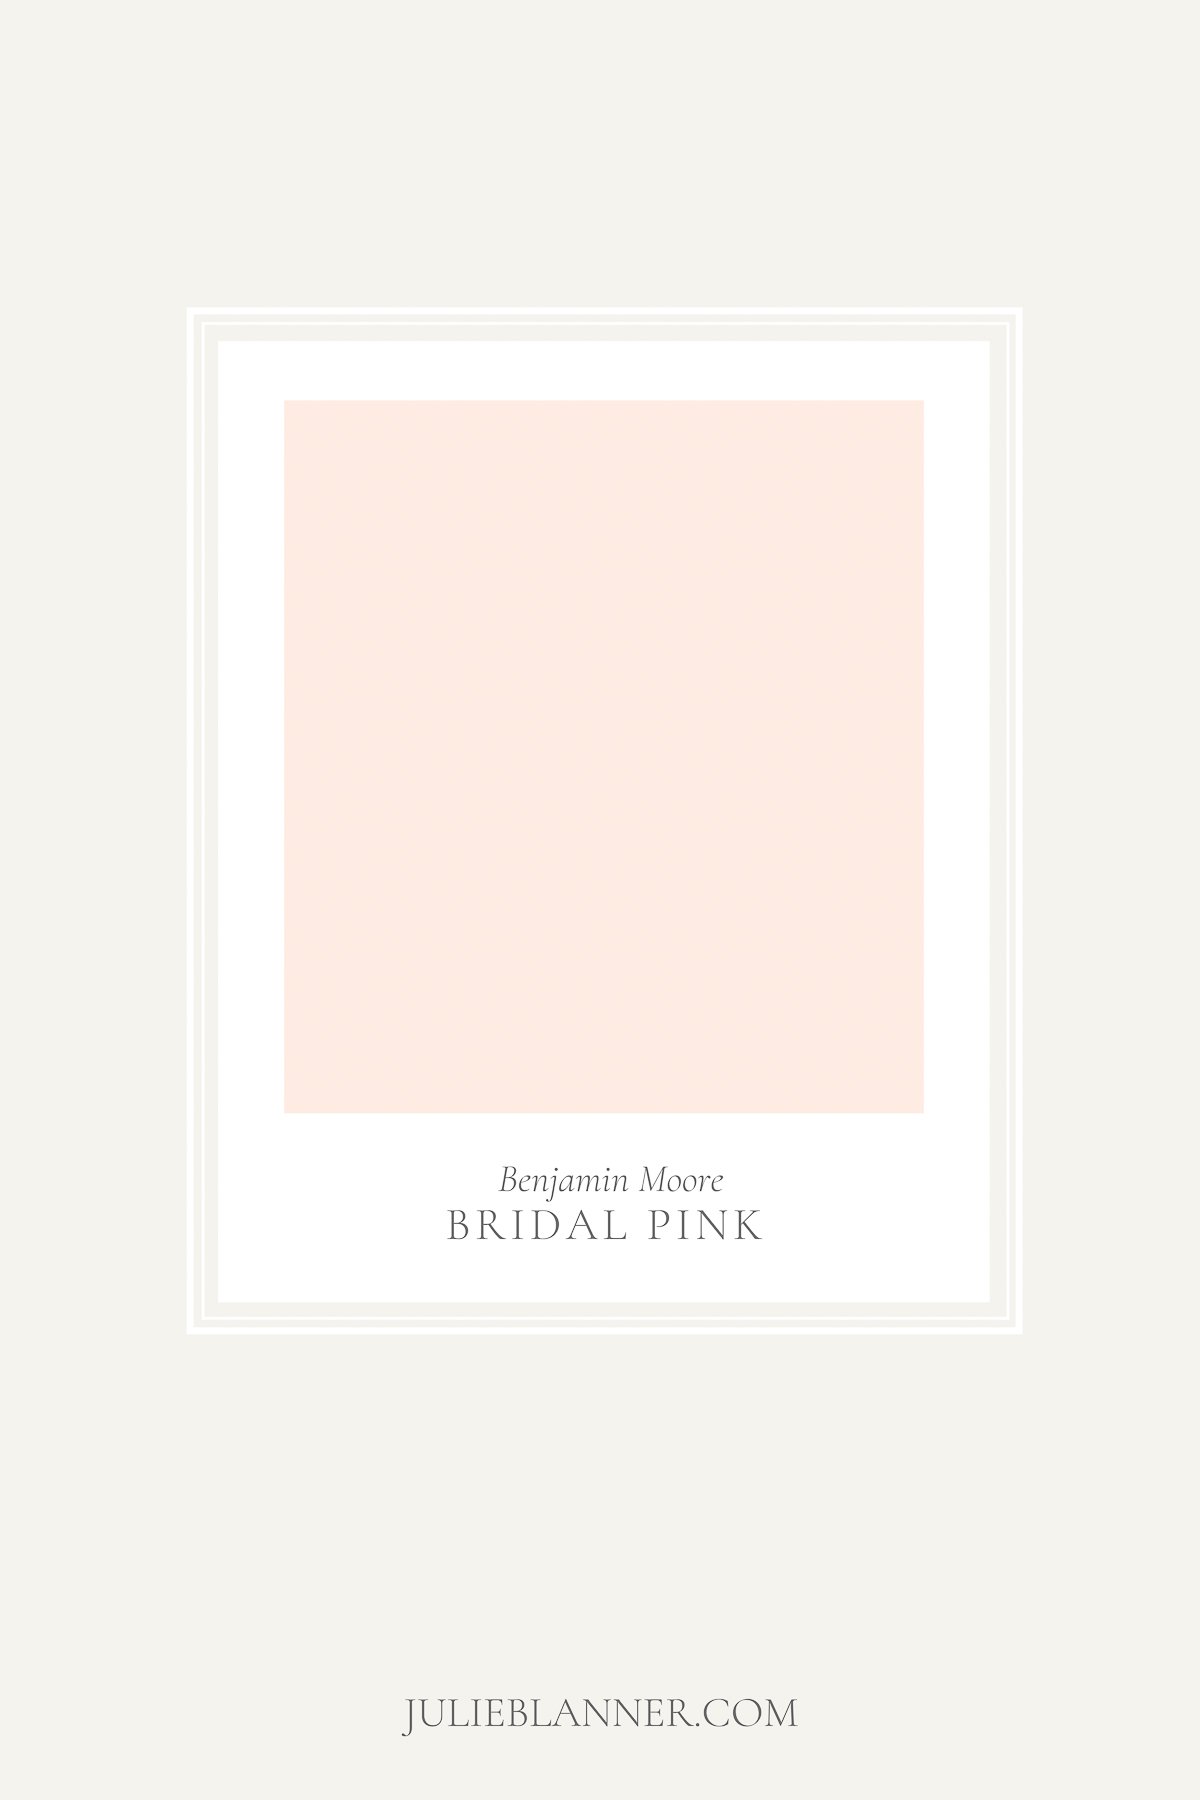 A paint sample card of Benjamin Moore Bridal Pink, as part of a blush pink paint guide.